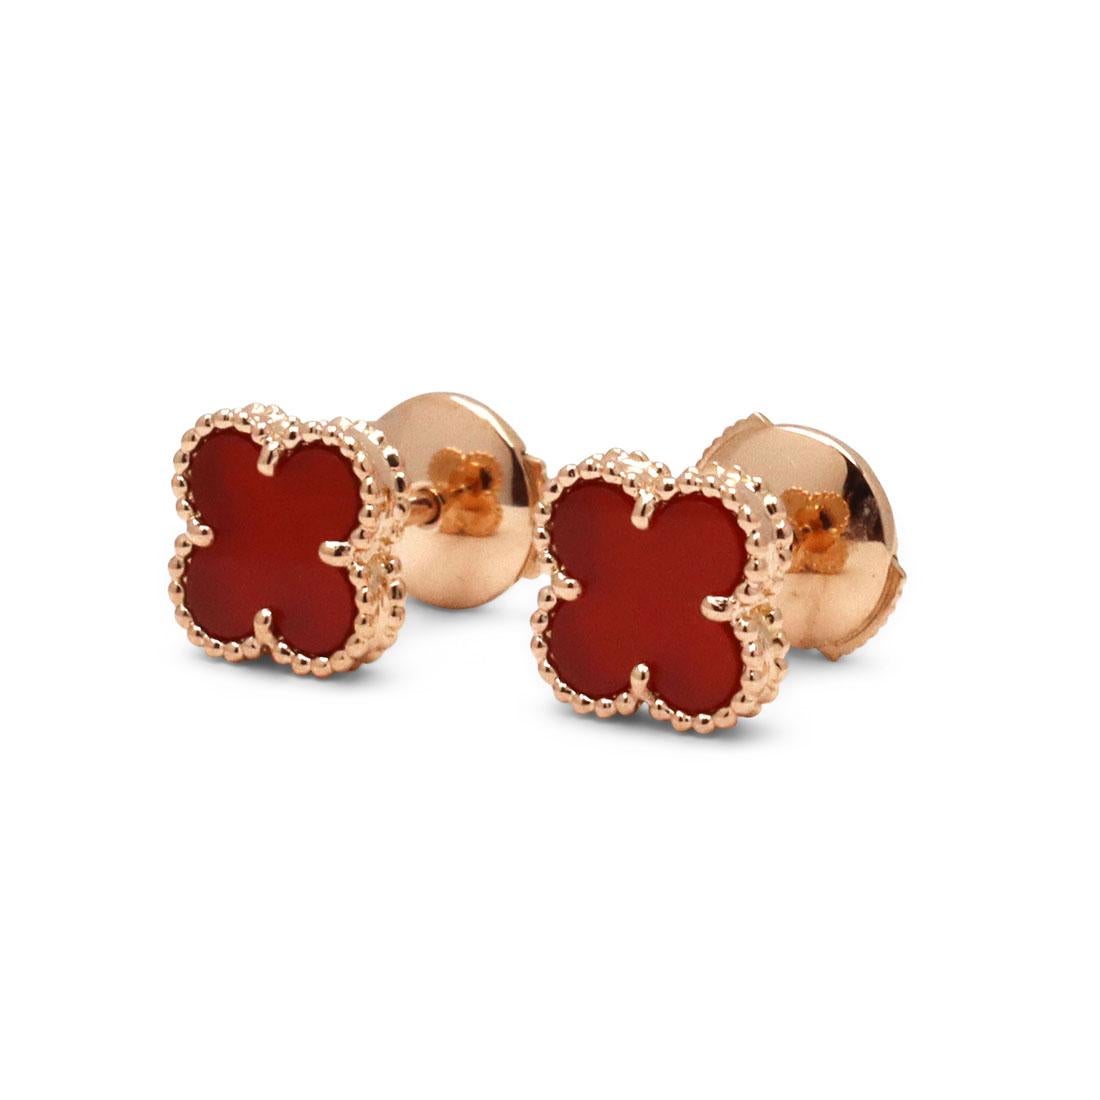 Authentic Van Cleef & Arpels Sweet Alhambra carnelian earrings crafted in 18 karat rose gold. These stunning studs feature the classic 'lucky motif' in miniature form, encasing a carnelian stone. Signed VCA, AU750, with serial number and French